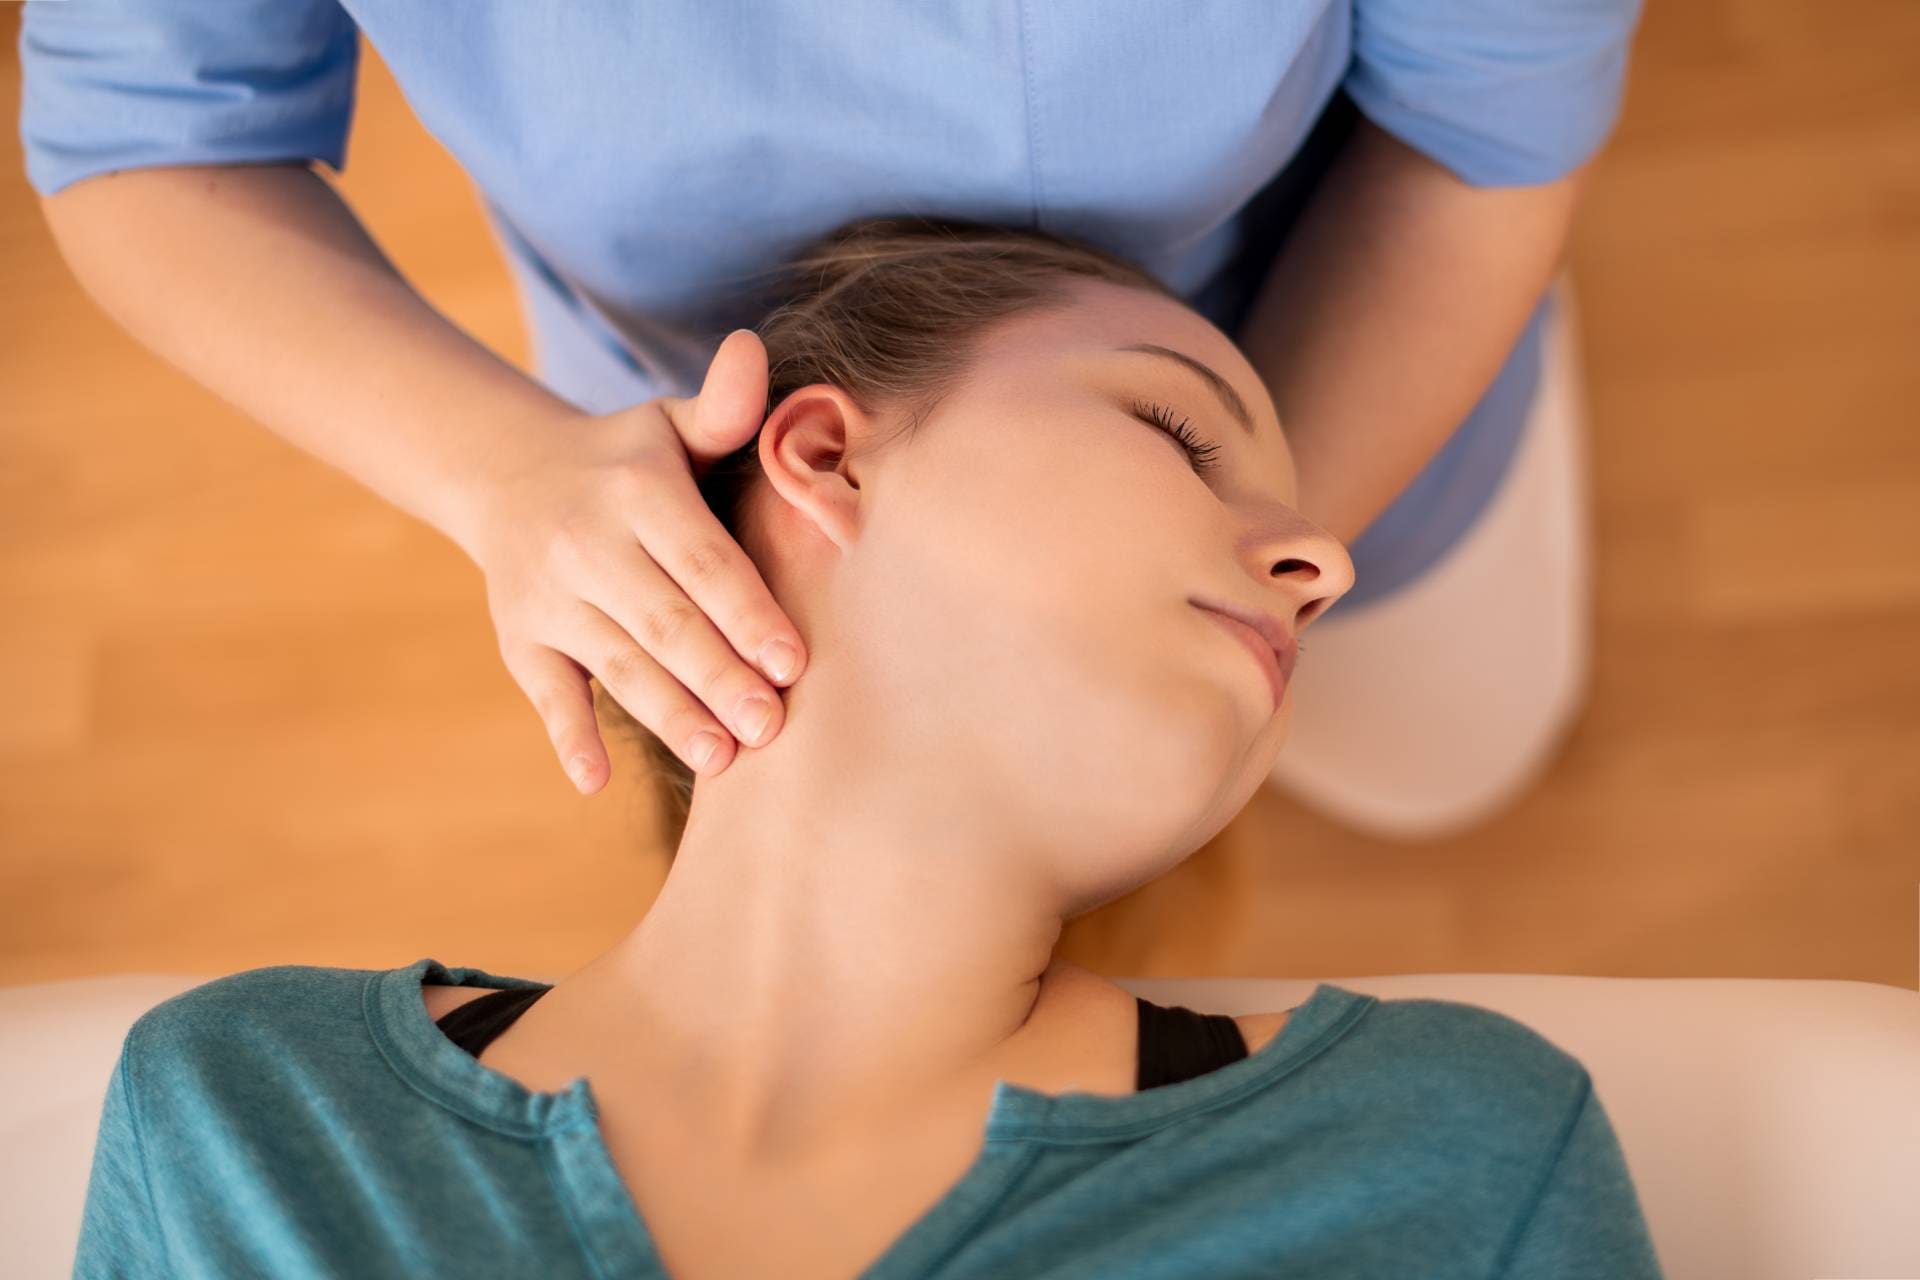 Women being worked on by a chiropractor 